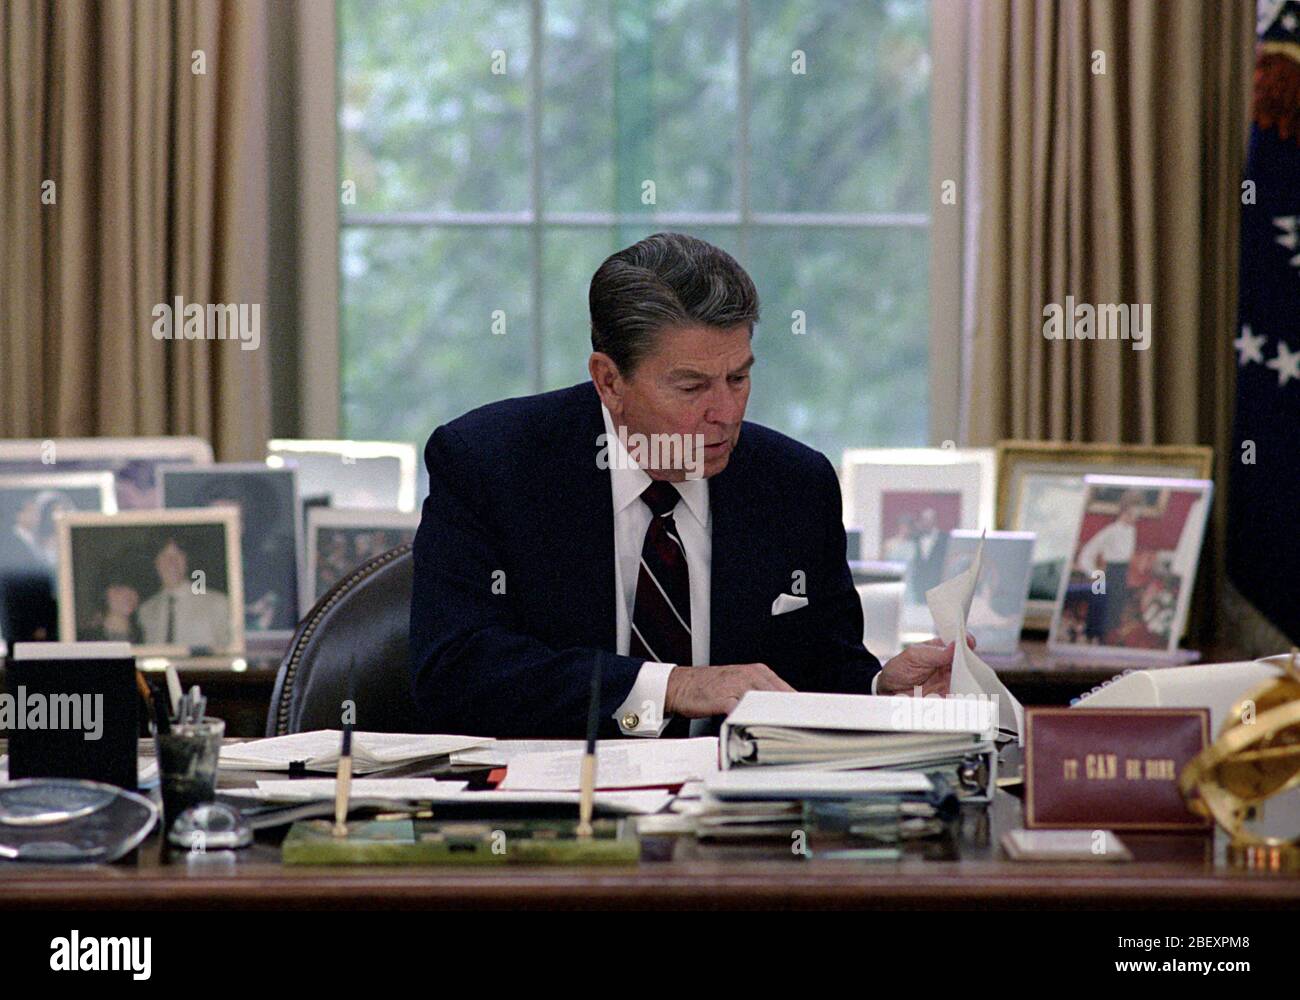 5/31/1985 President Reagan working in the Oval Office Stock Photo